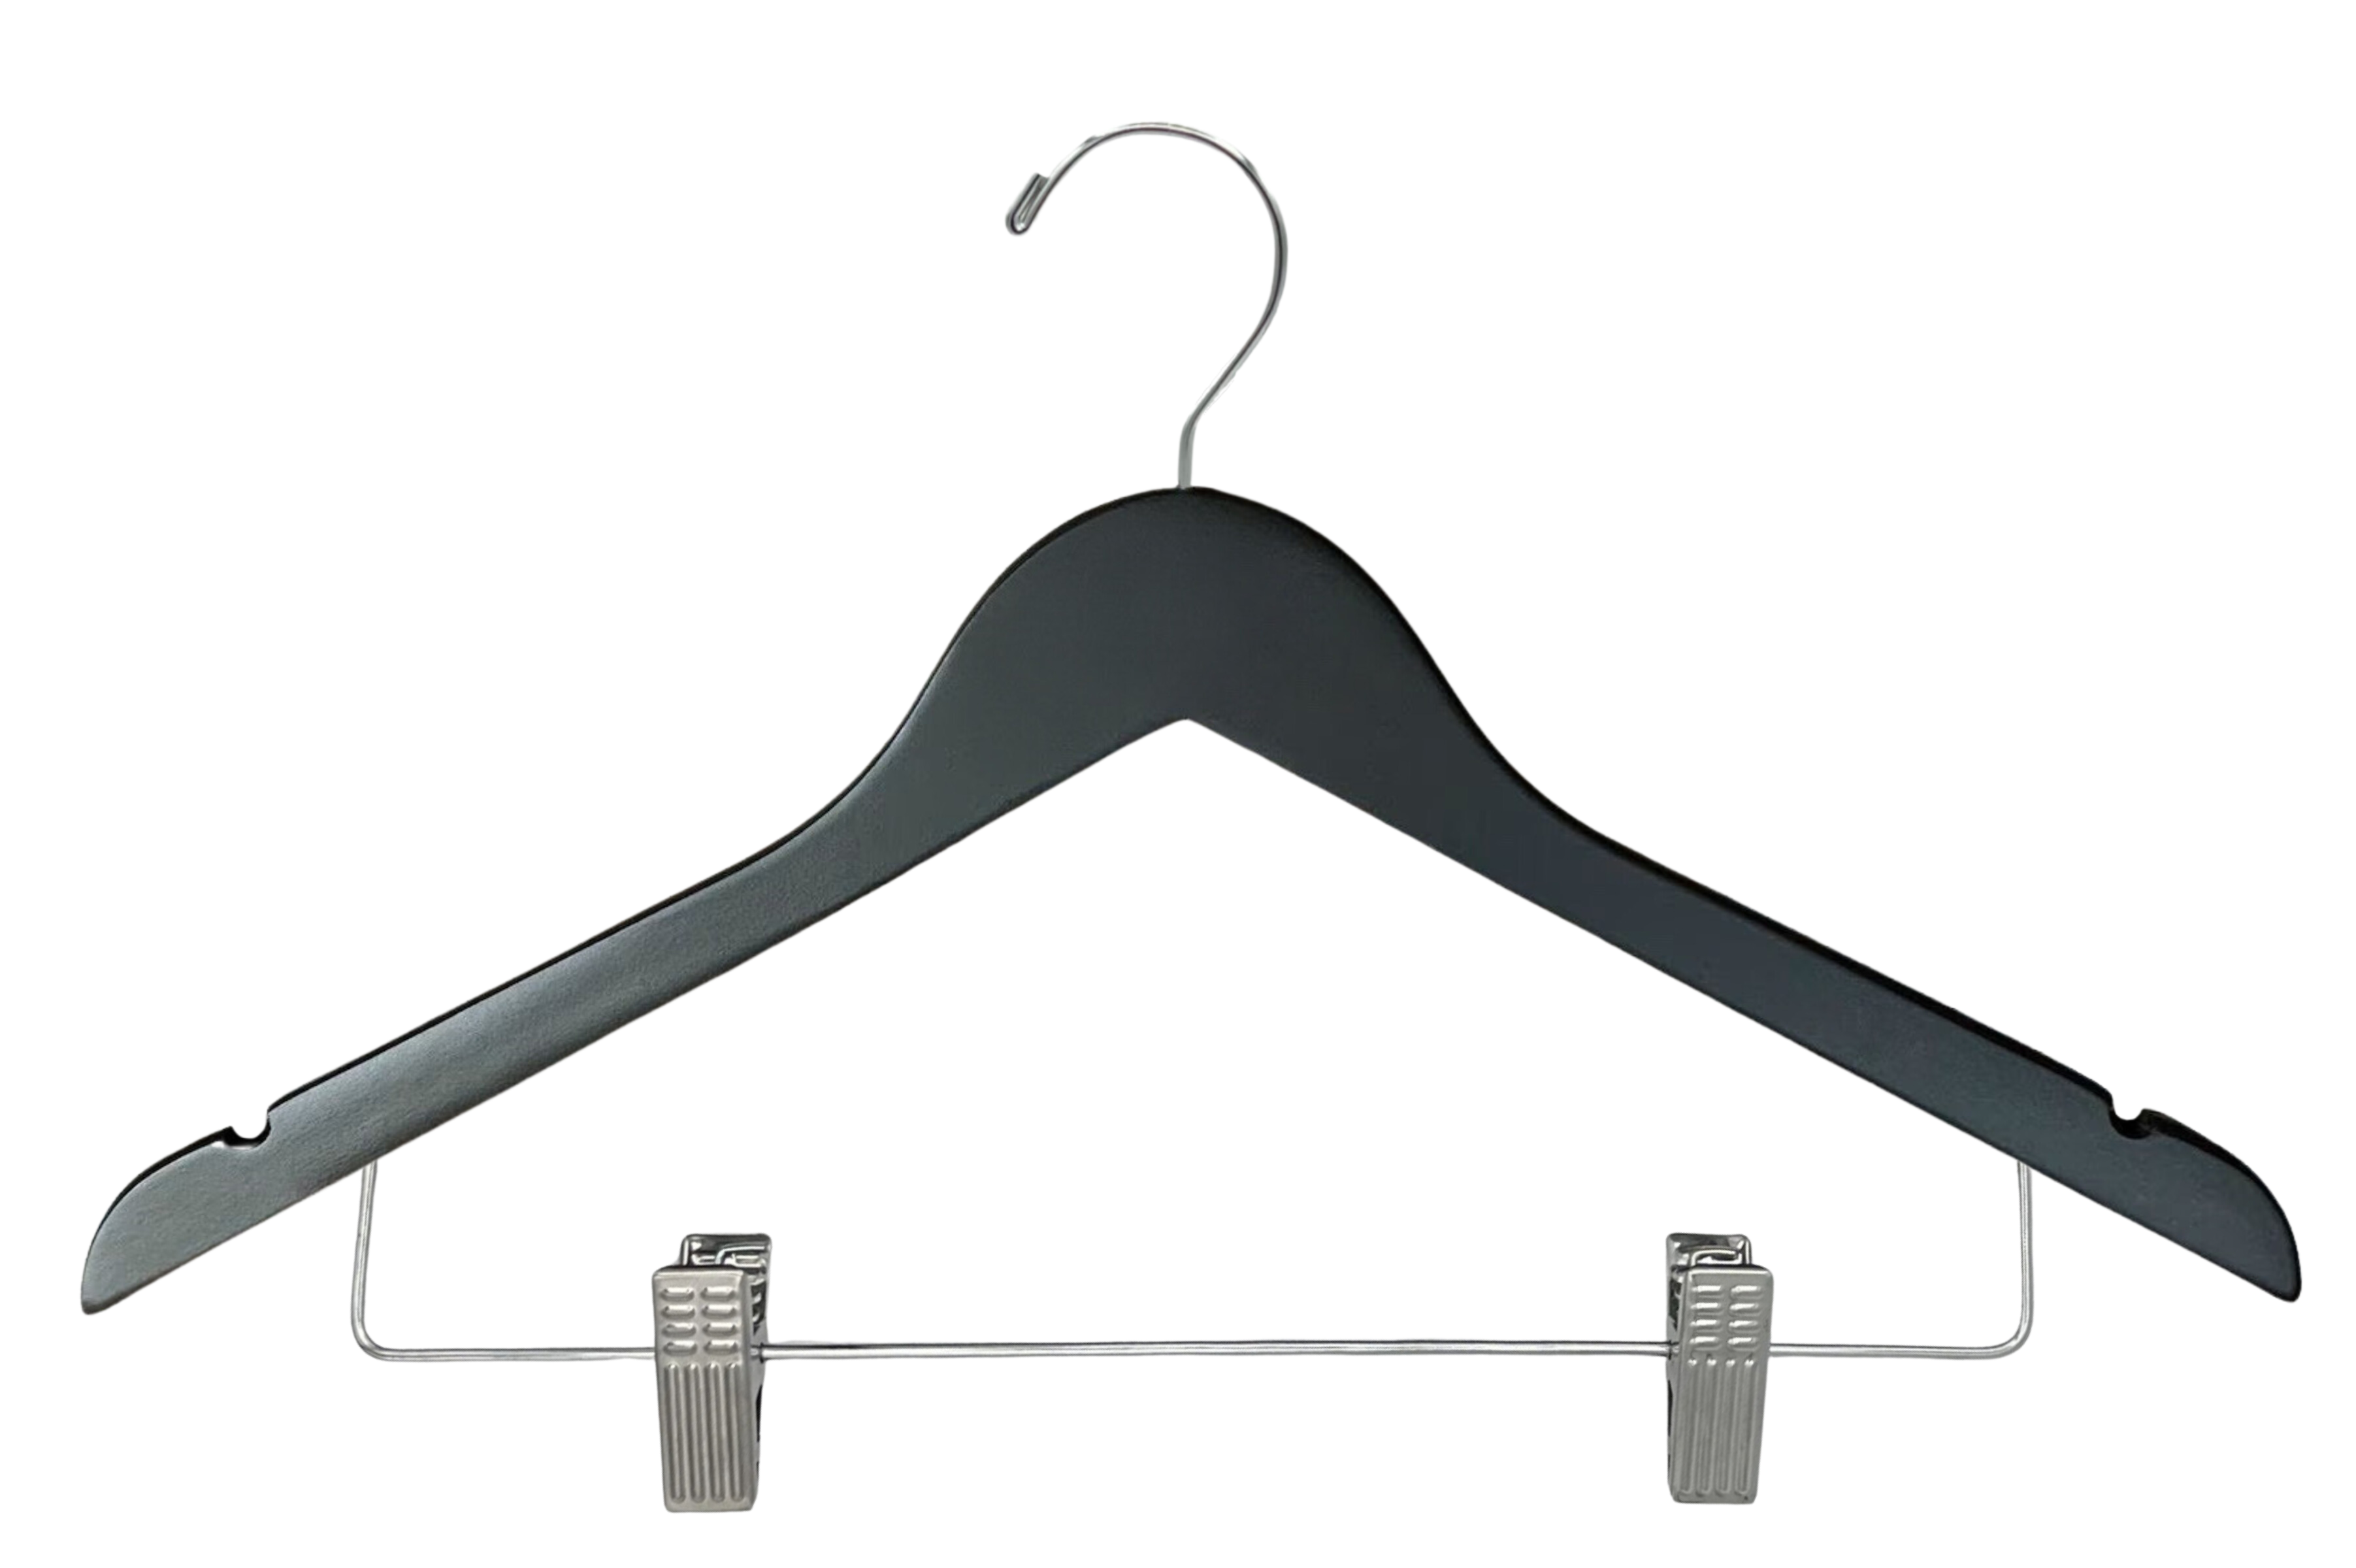 Matte Black Wooden Combination Hanger with adjustable cushion clips to hang both your top and bottom clothing